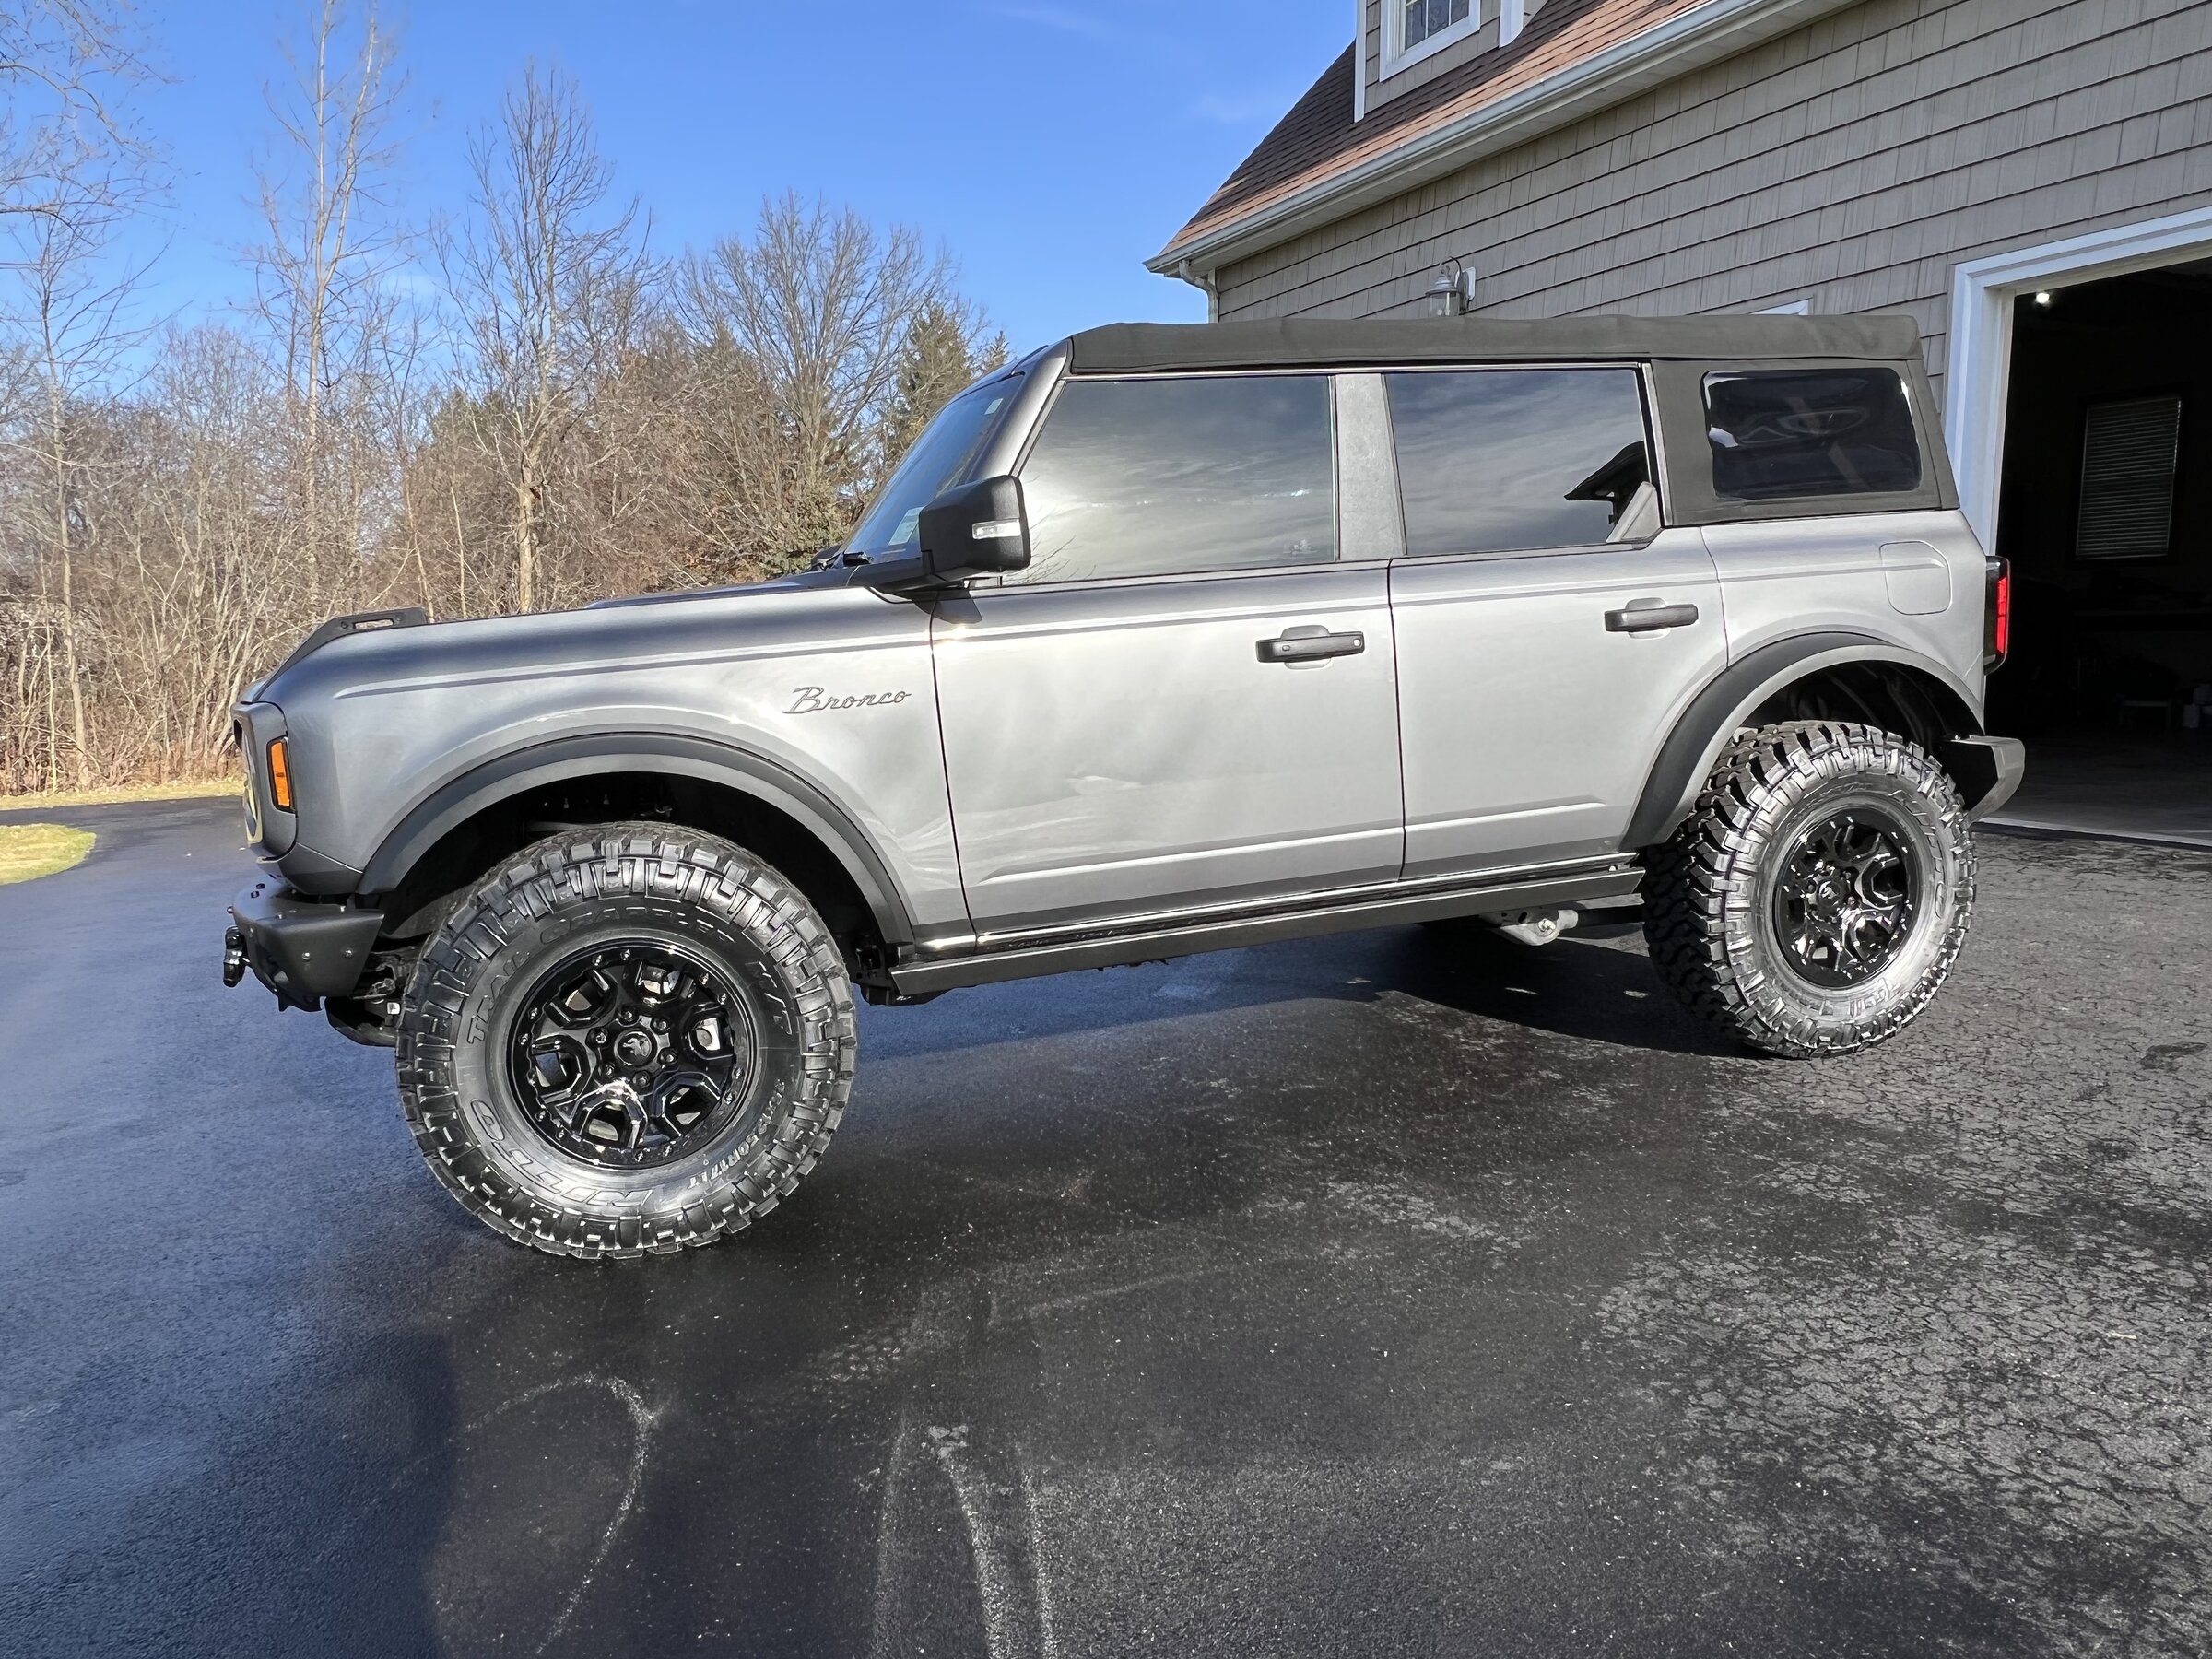 Ford Bronco Show us your installed wheel / tire upgrades here! (Pics) B5A6C761-818D-4C1B-ACCF-3D6D4C621DF0